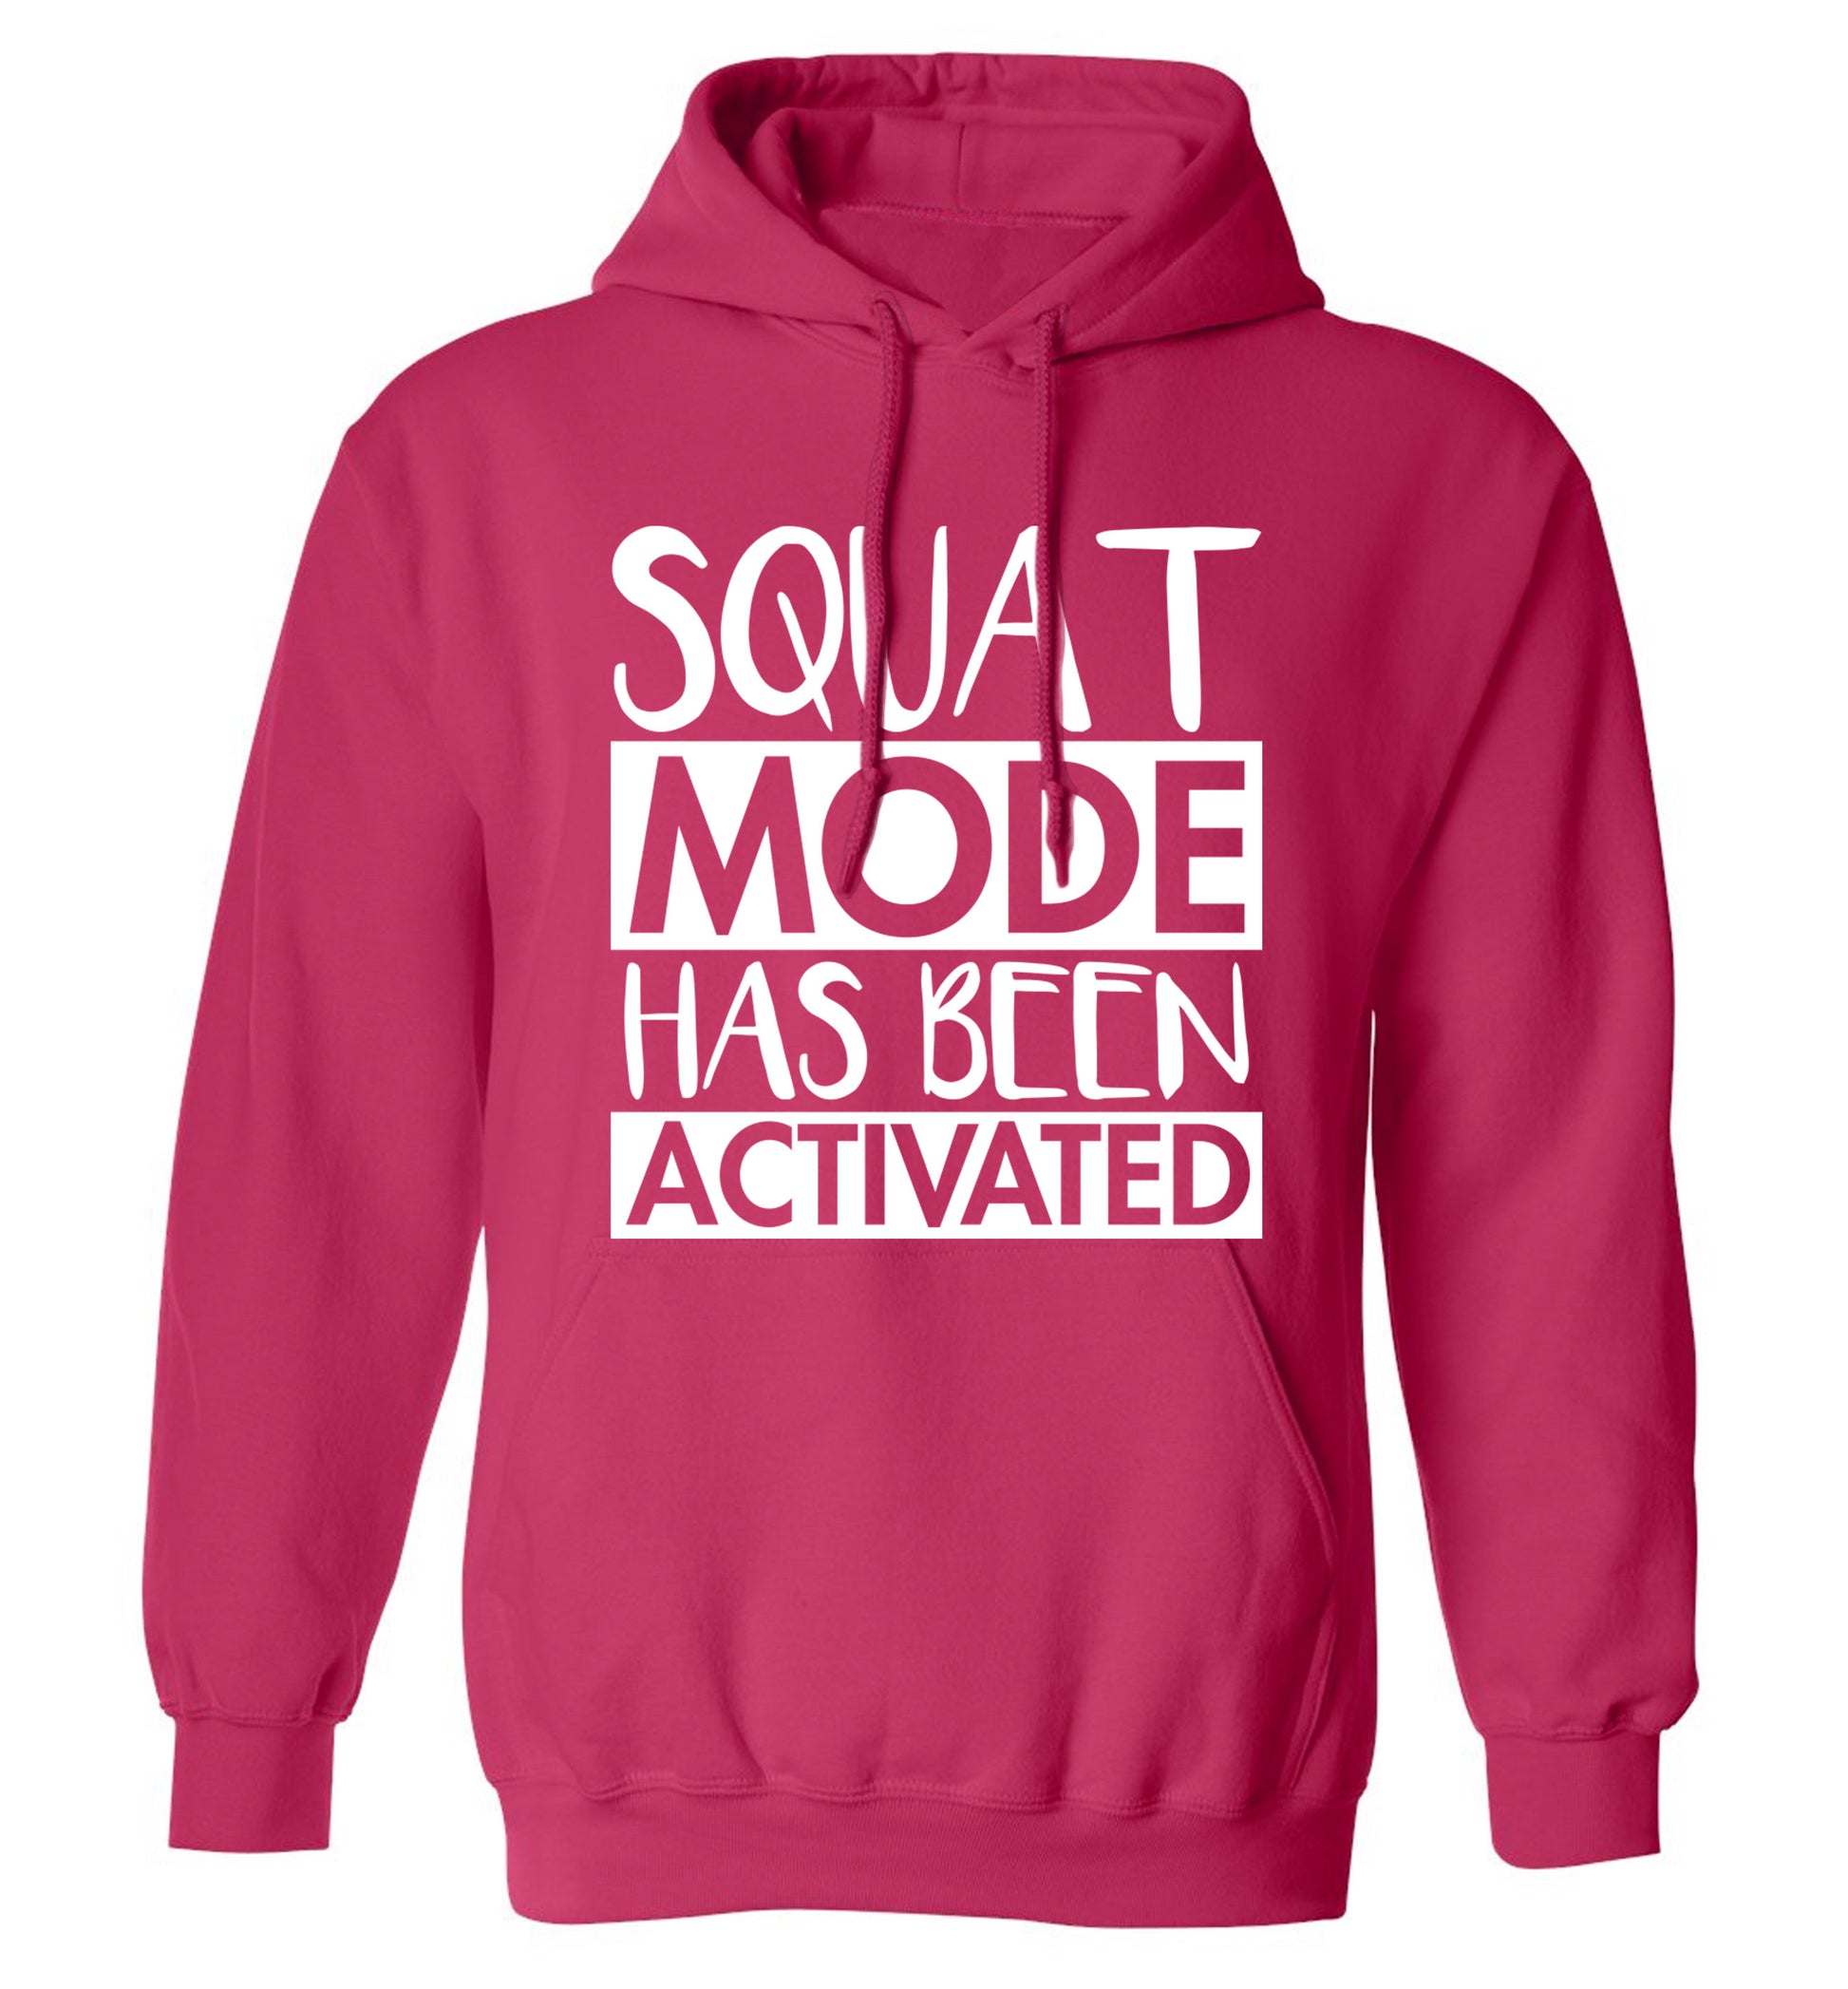 Squat mode activated adults unisex pink hoodie 2XL